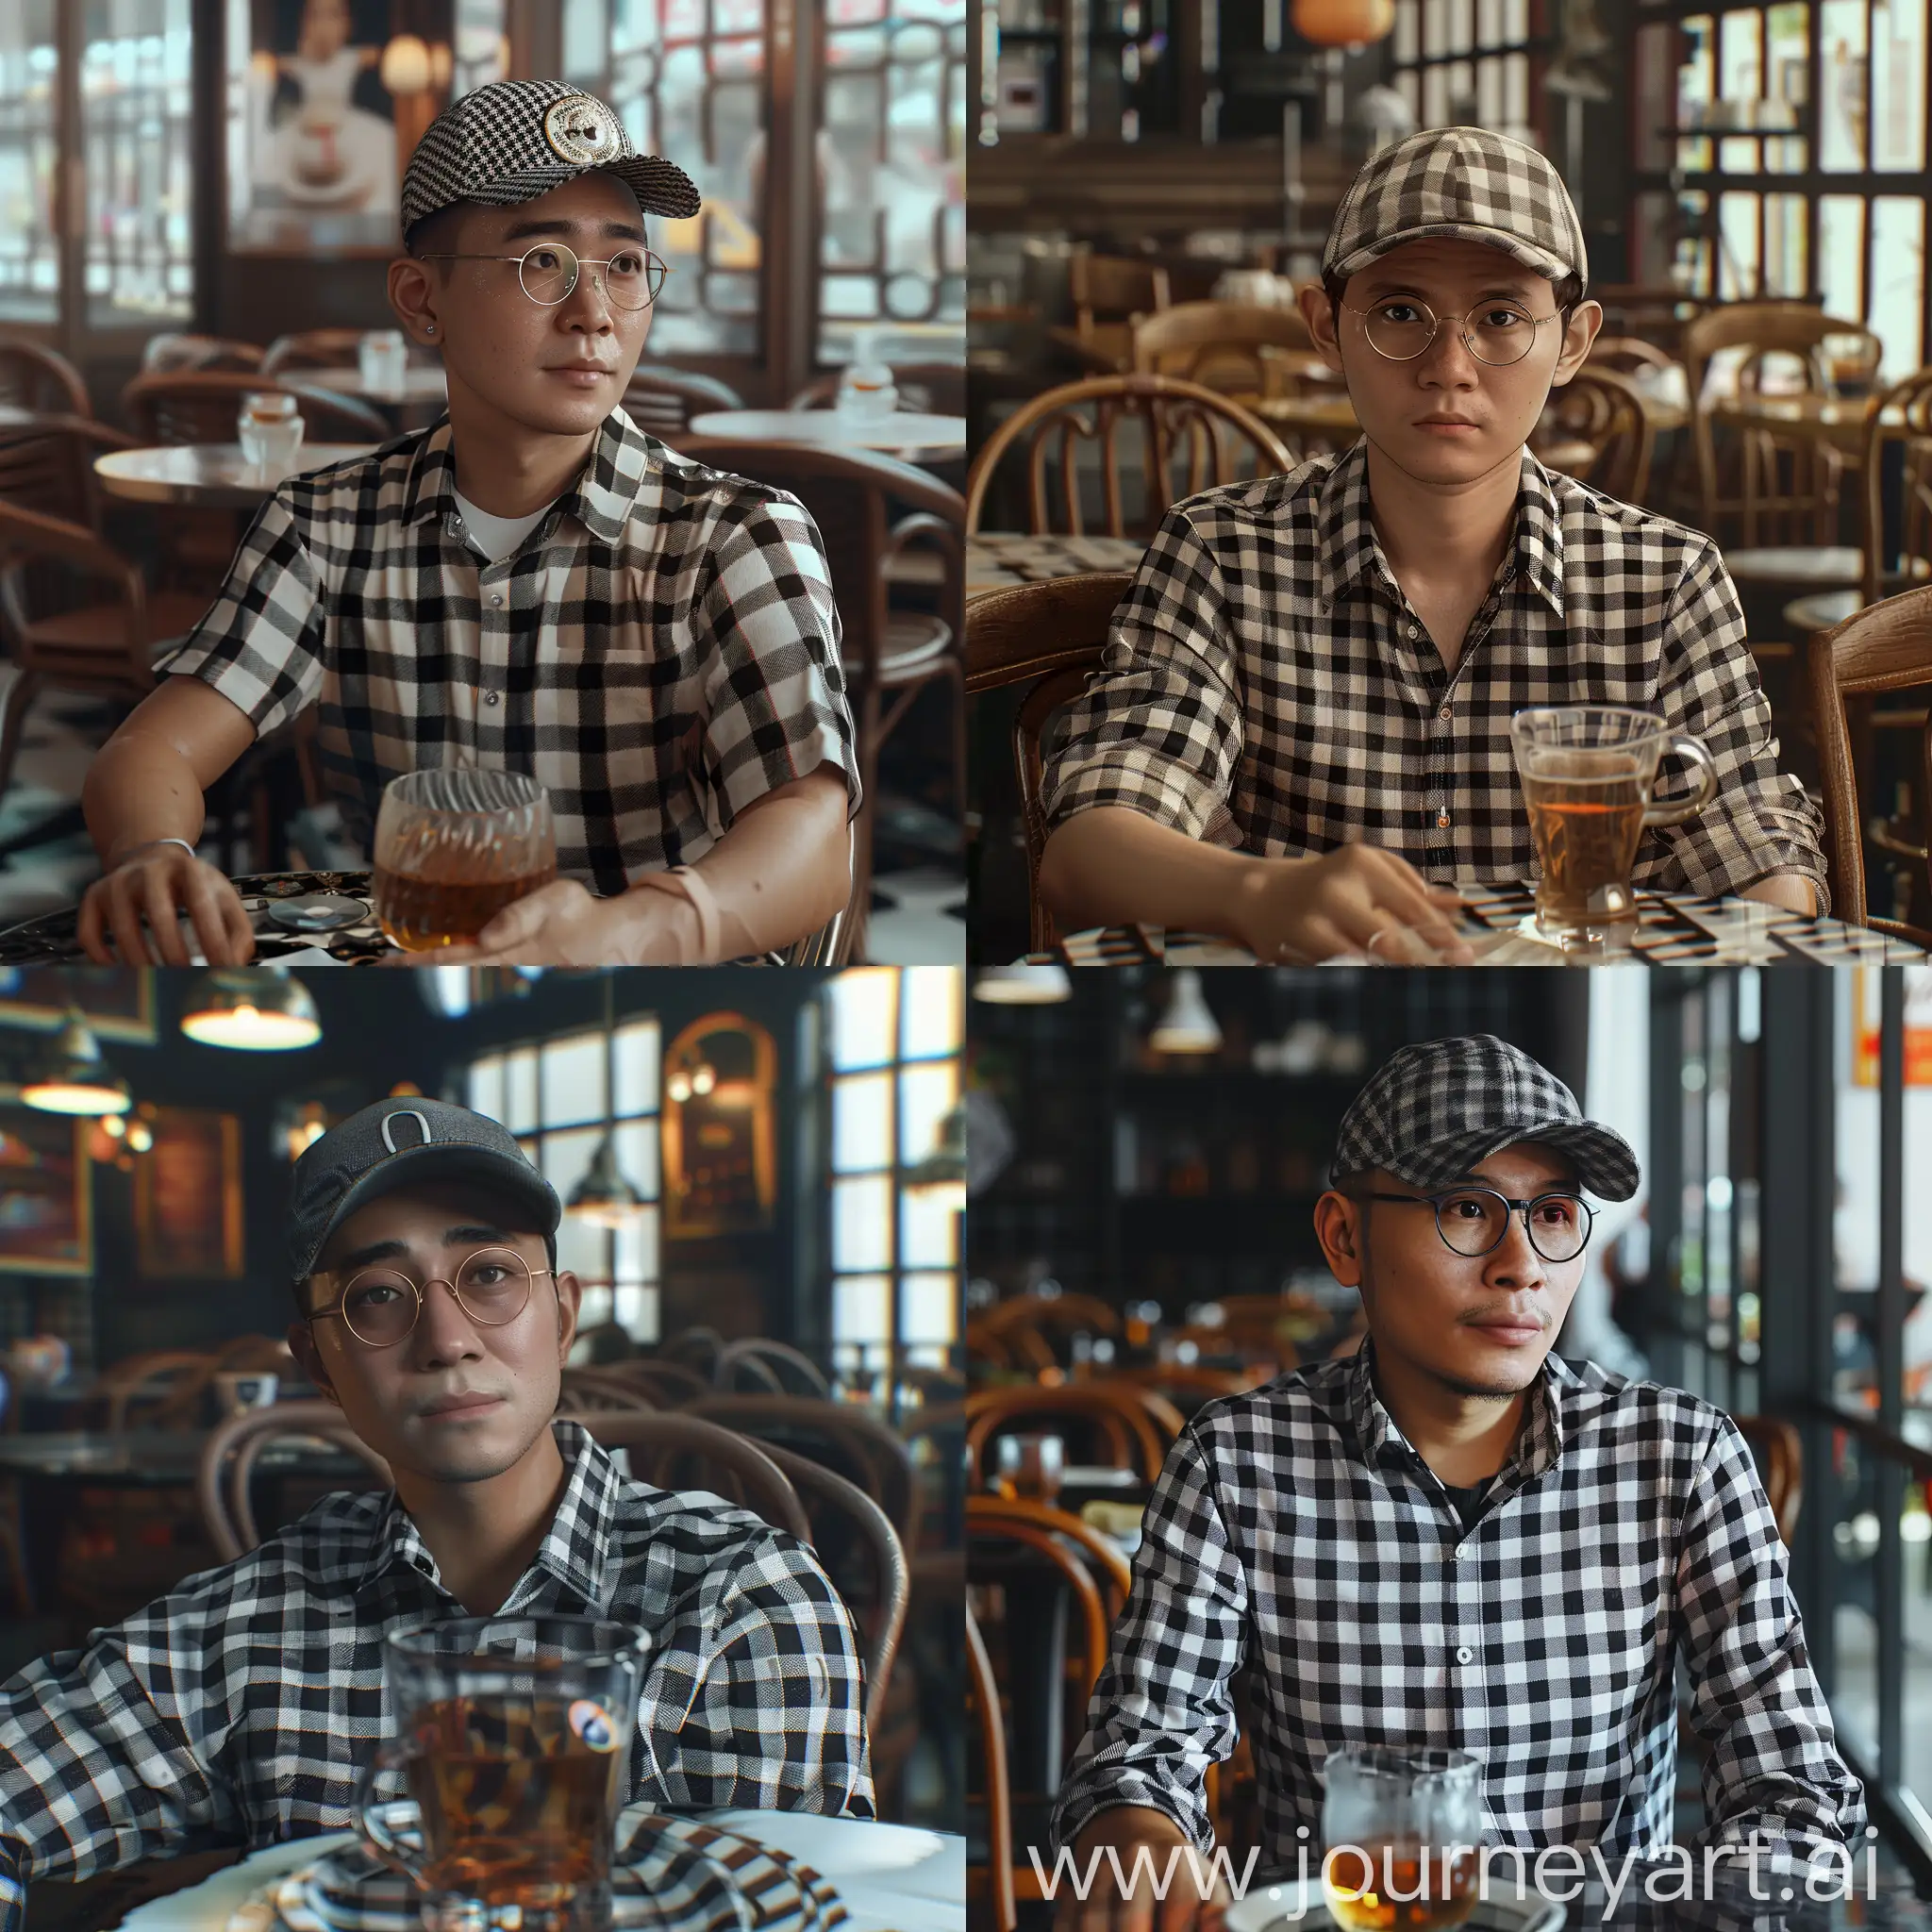 Young-Indonesian-Man-Relaxing-with-Tea-in-Stylish-Cafe-Setting